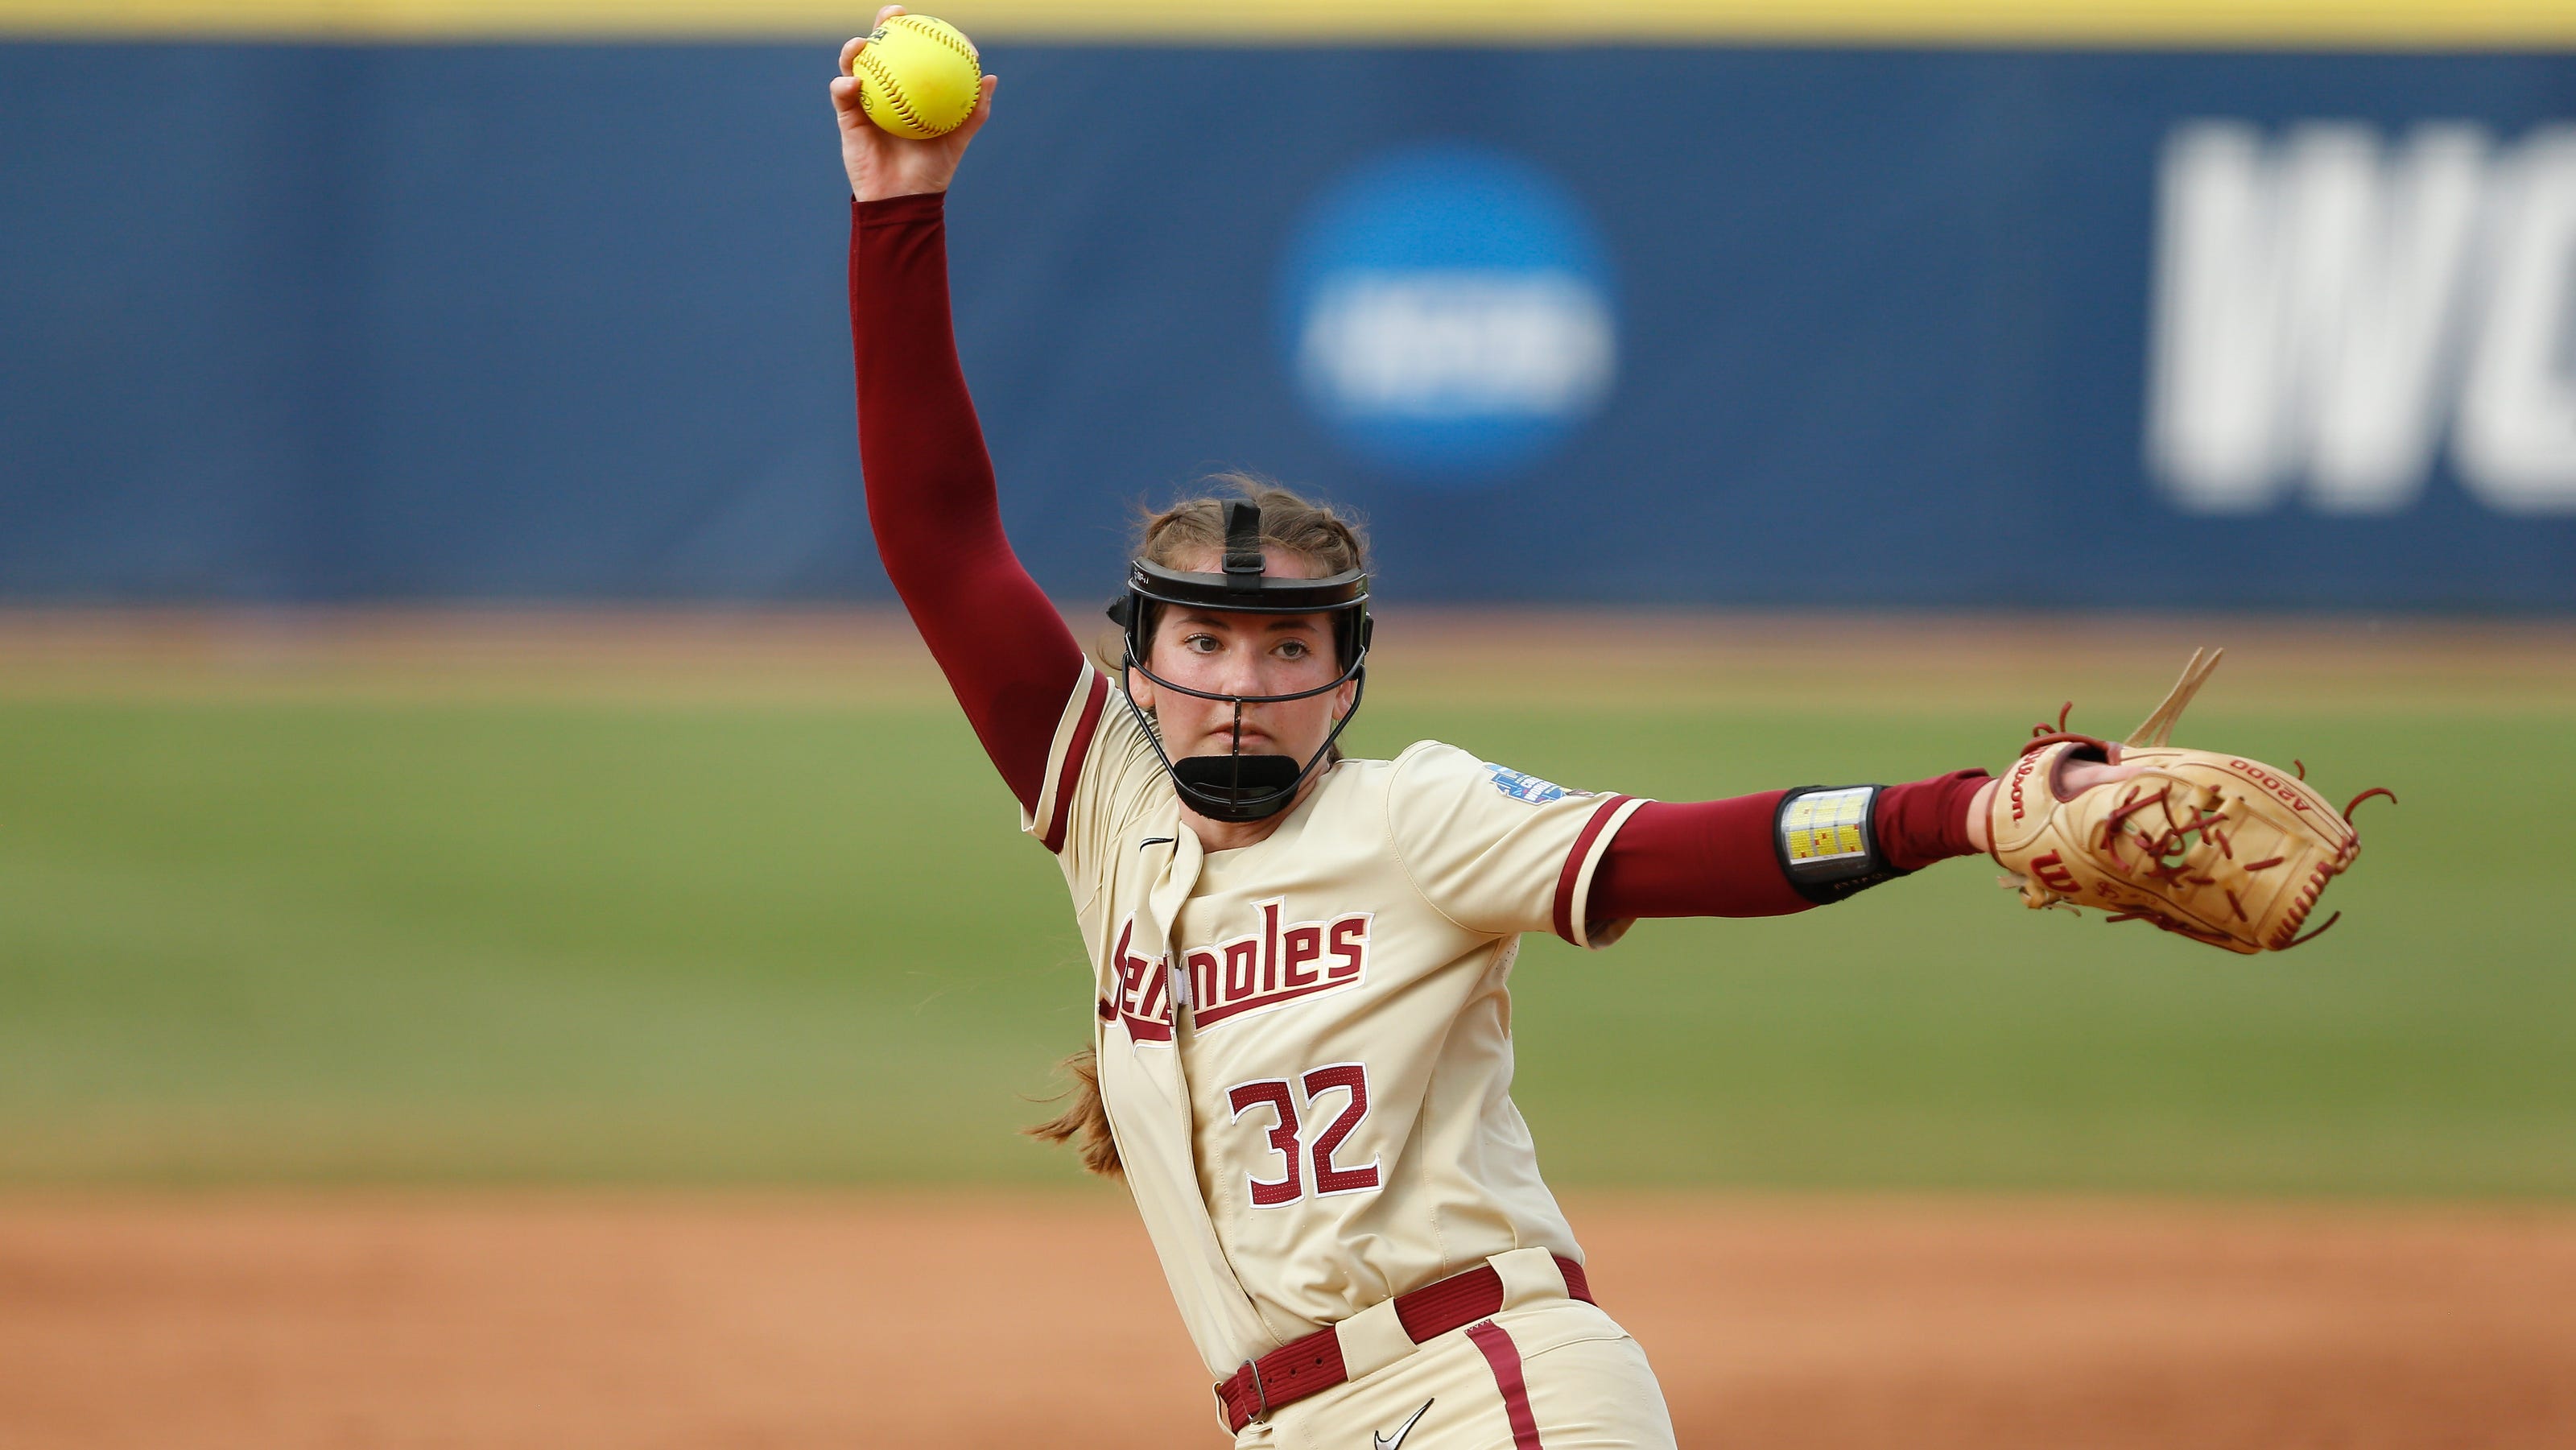 How a Florida State softball pitcher uses NIL to market lessons